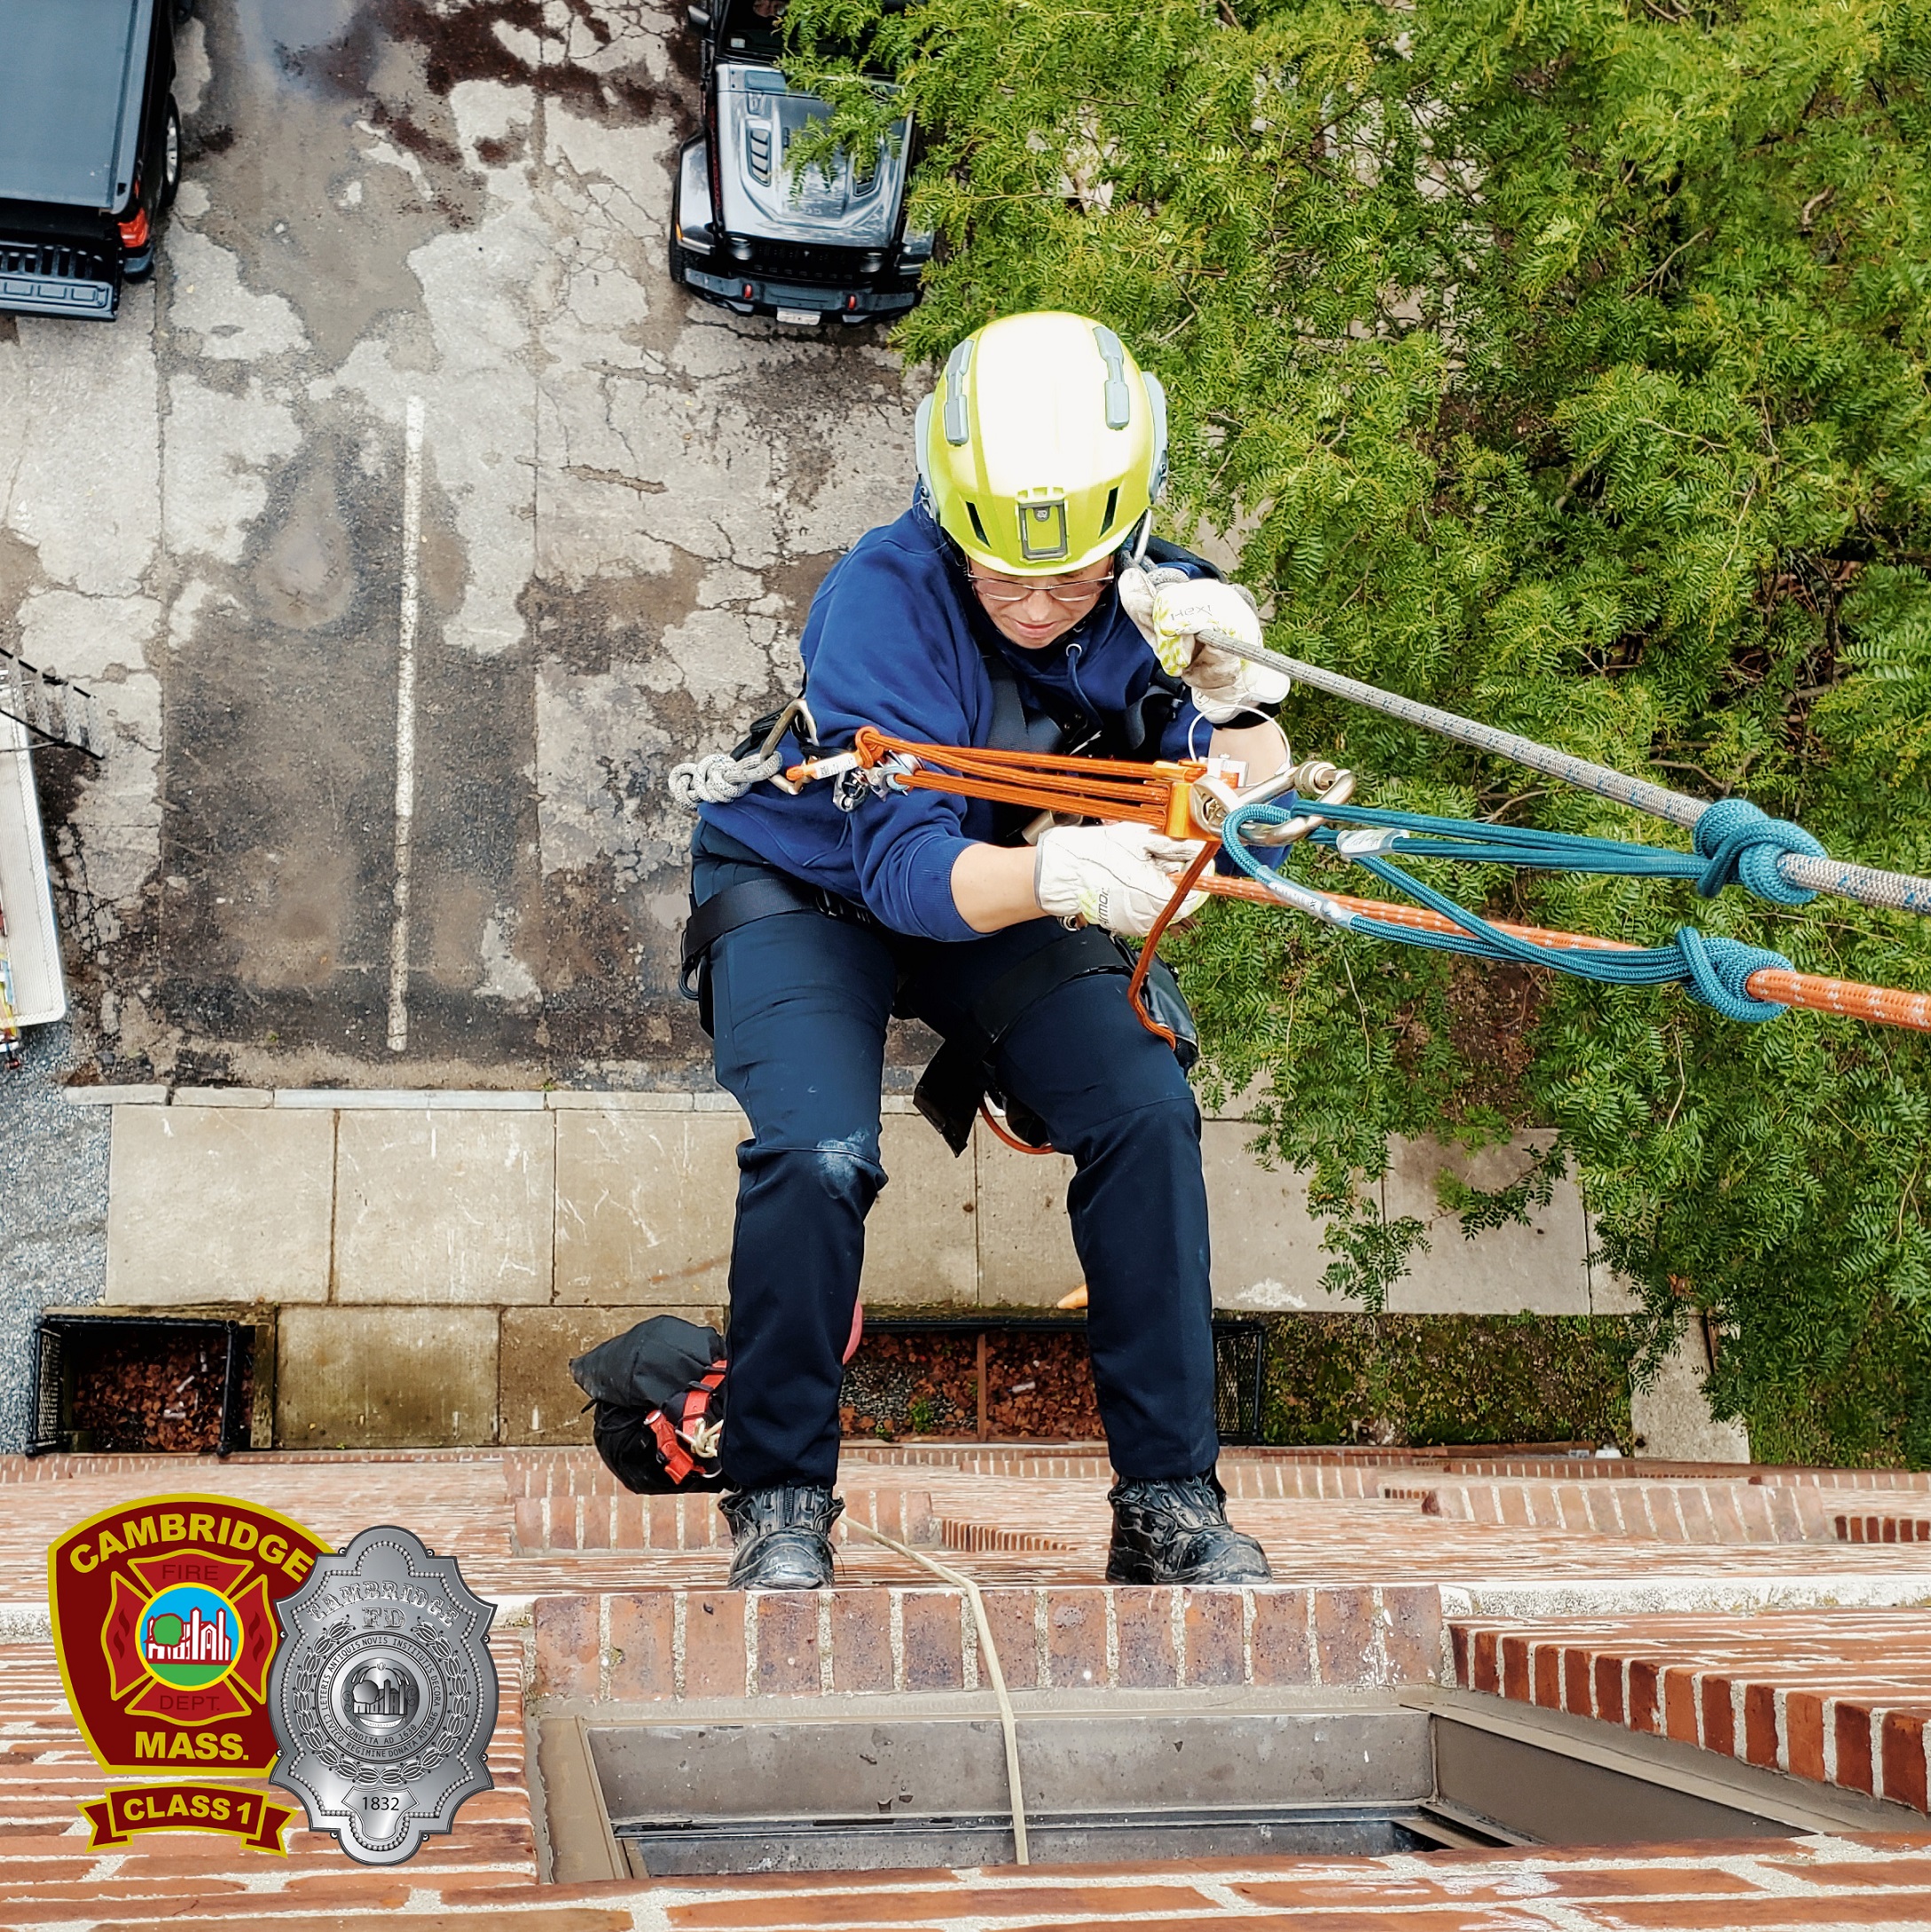 Cambridge Fire Dept. on X: IV) Tech Rescue High Angle Drill: In